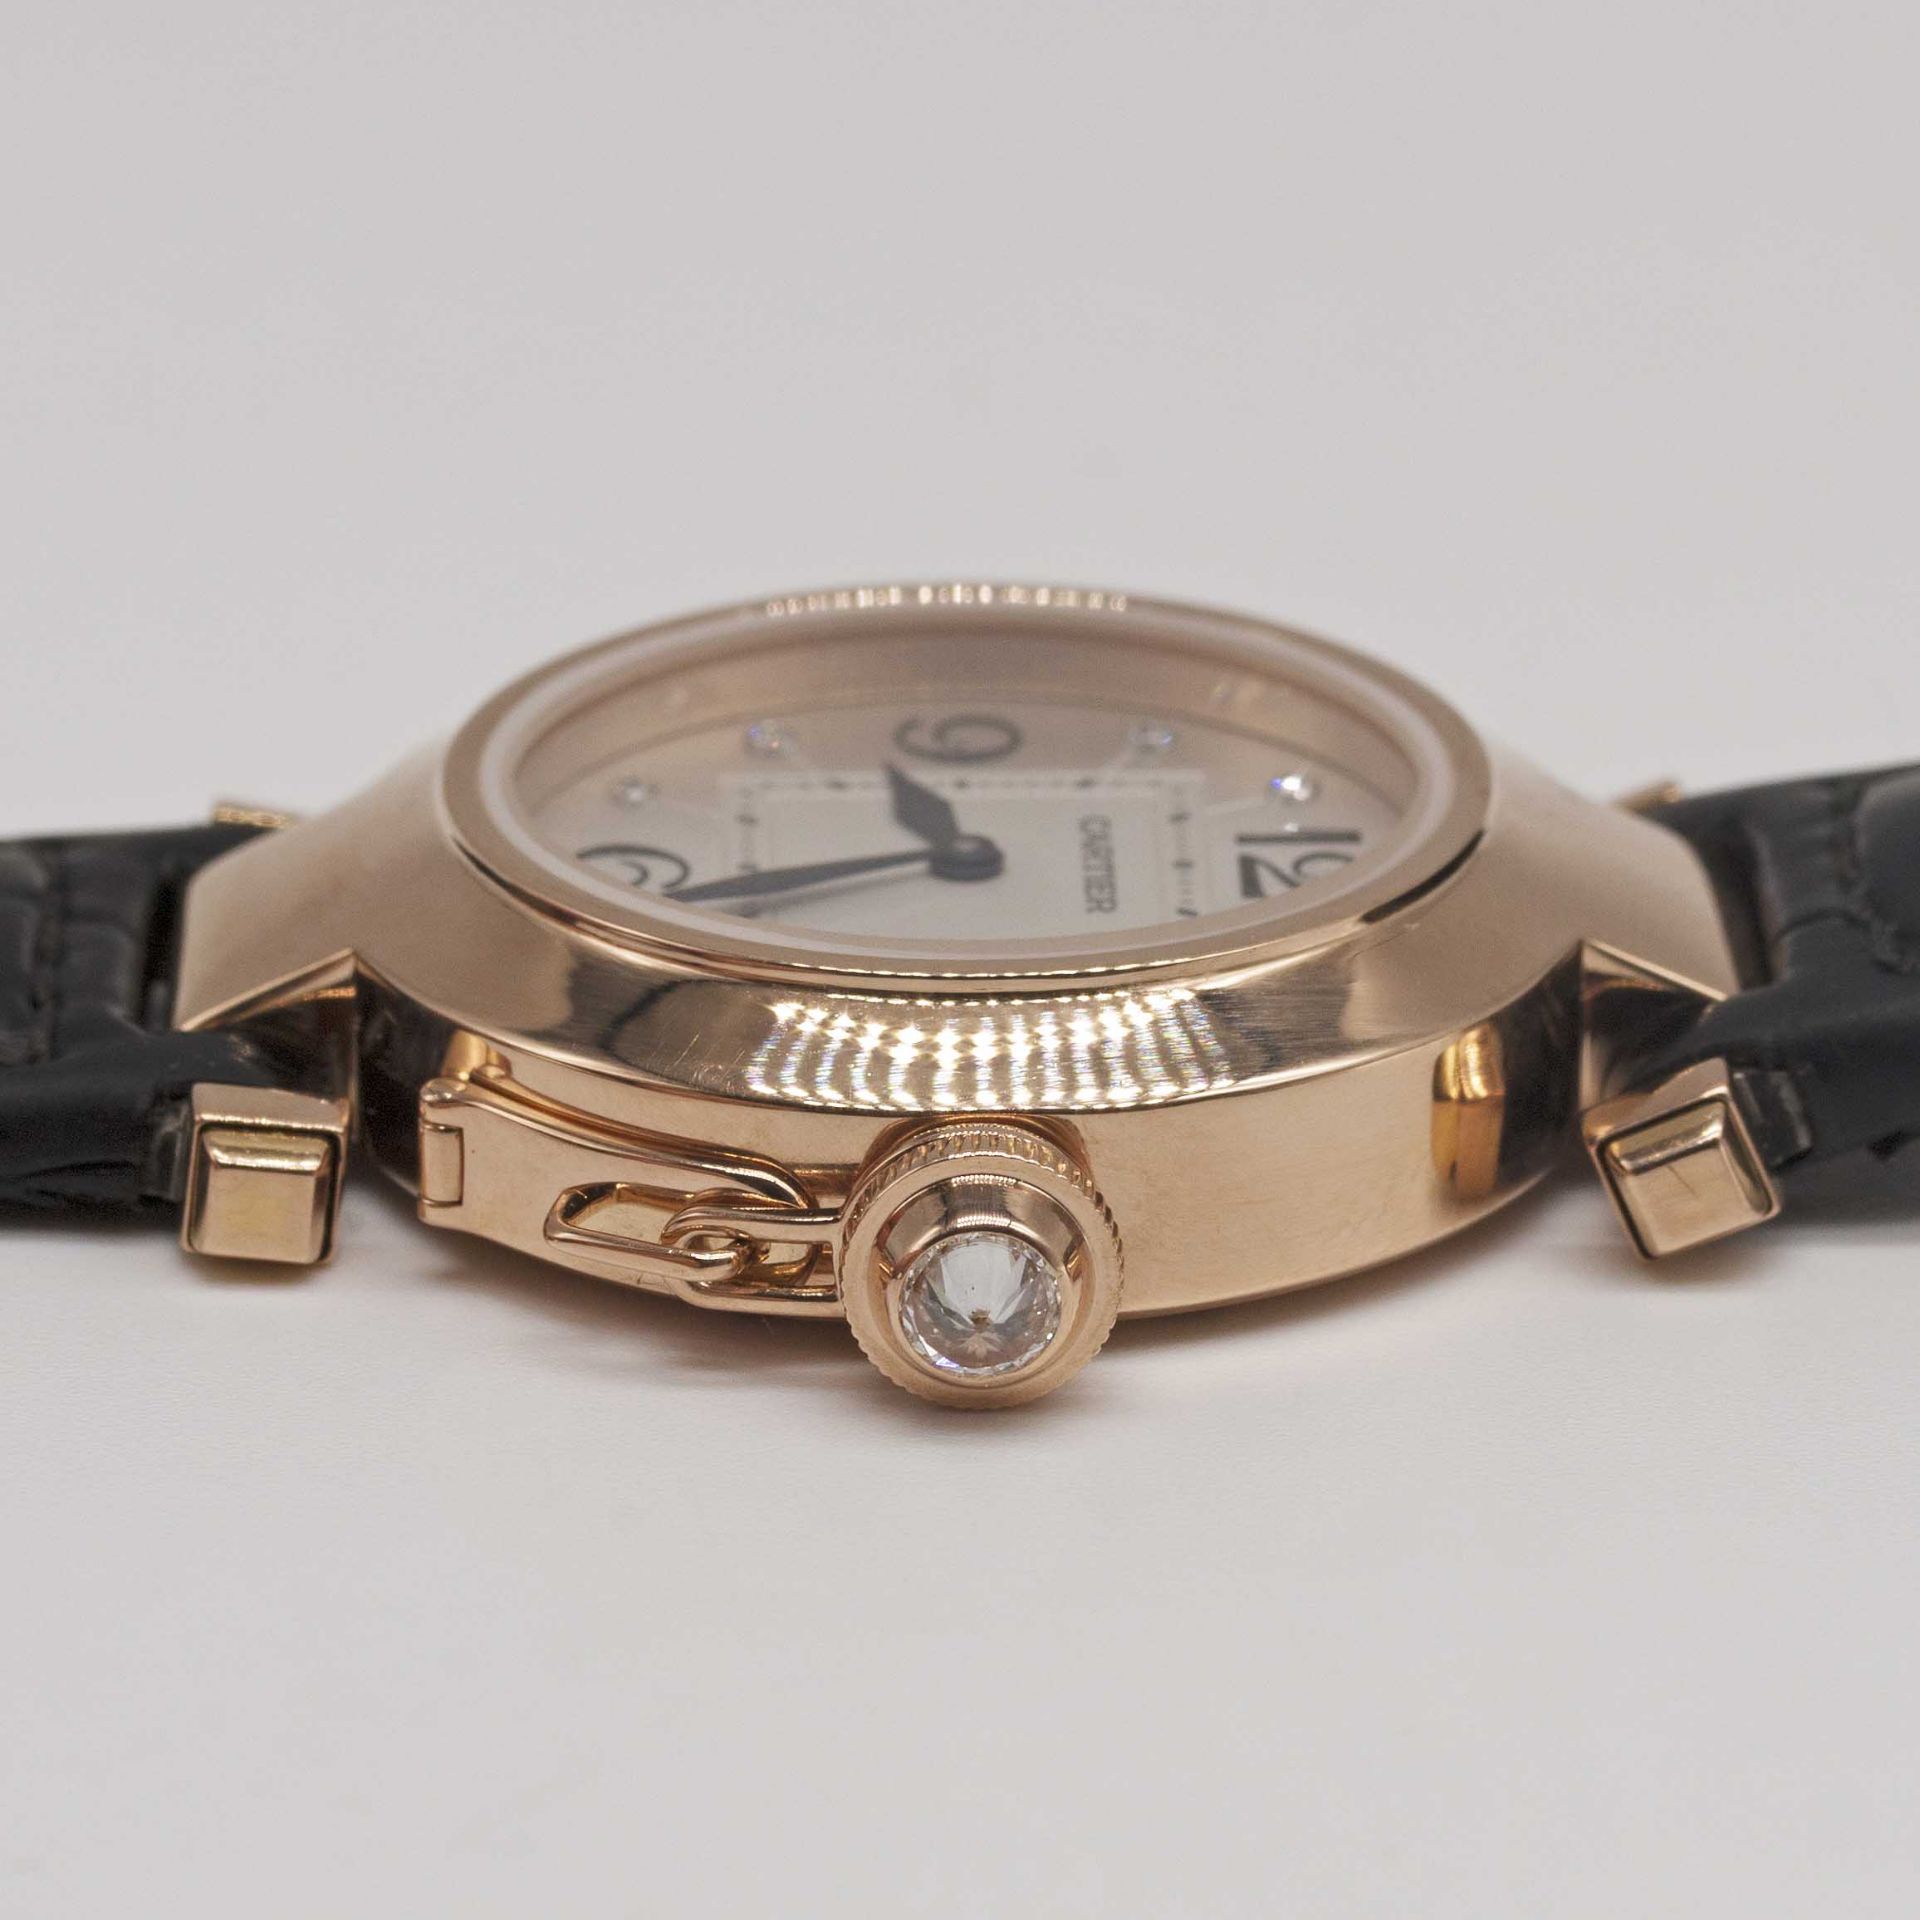 A LADIES 18K SOLID ROSE GOLD CARTIER PASHA WRIST WATCH DATED 2007, REF. 2812 WITH ORIGINAL BOX, - Image 8 of 12